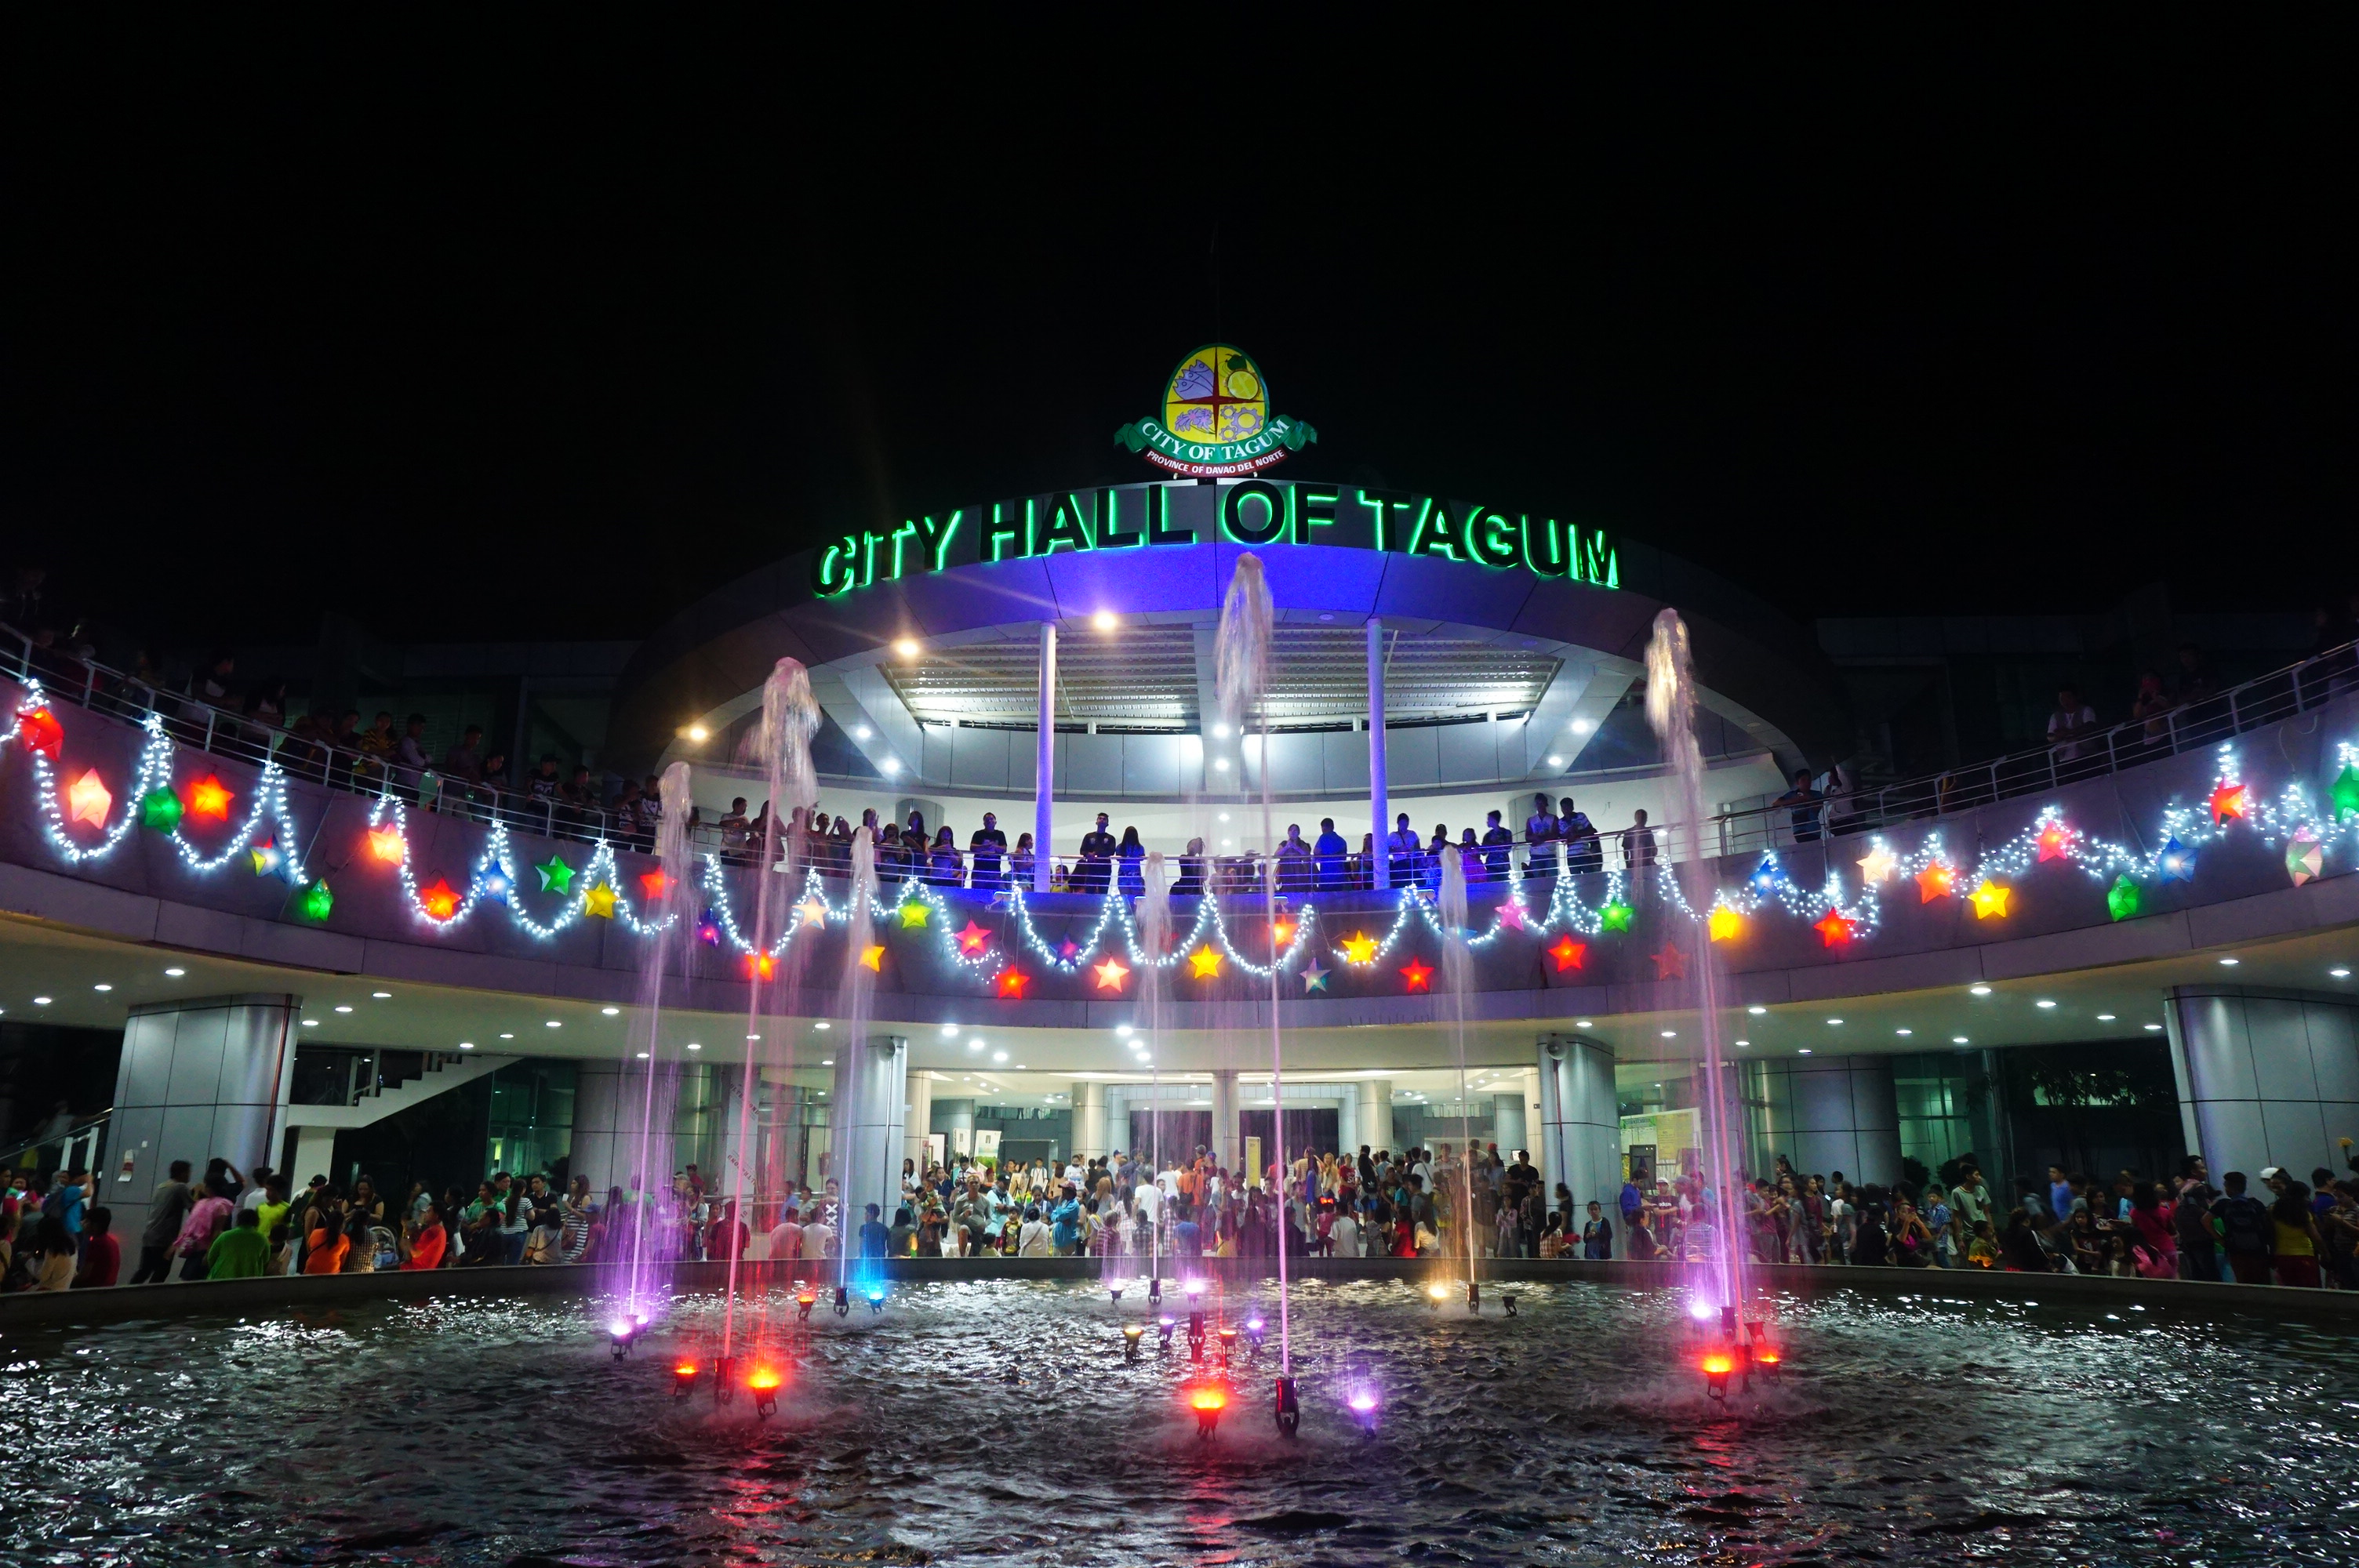 The New City Hall of Tagum is also adorned with Christmas lights. Photo by Louie Lapat  